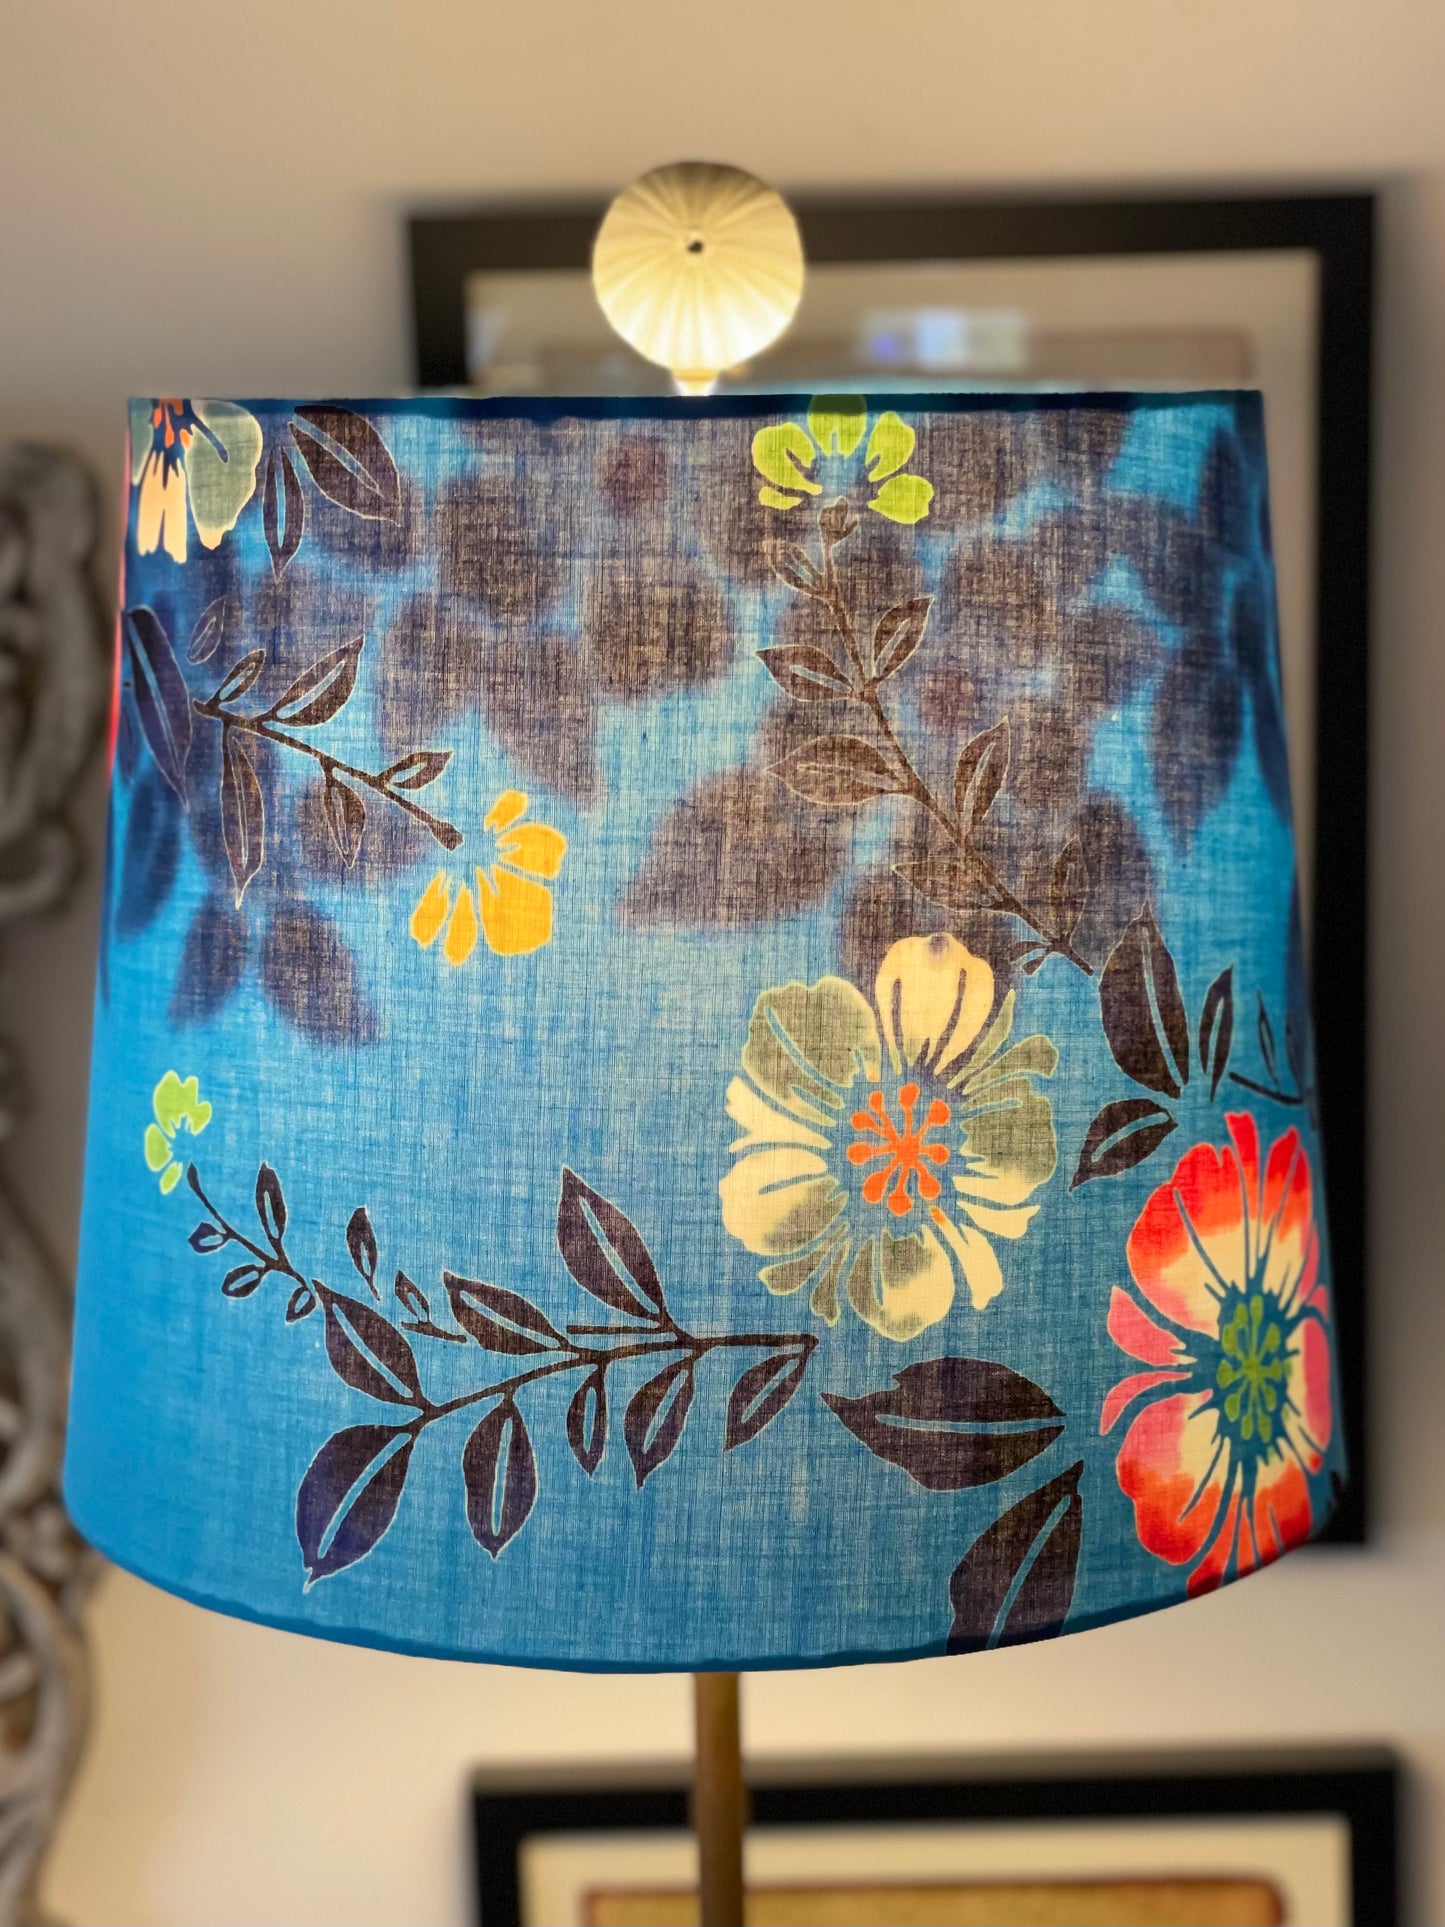 Medium Empire Lampshade. Vintage Summer Kimono "Yukata" Fabric from Japan. Bright Teal Blue with Multicolored Floral.